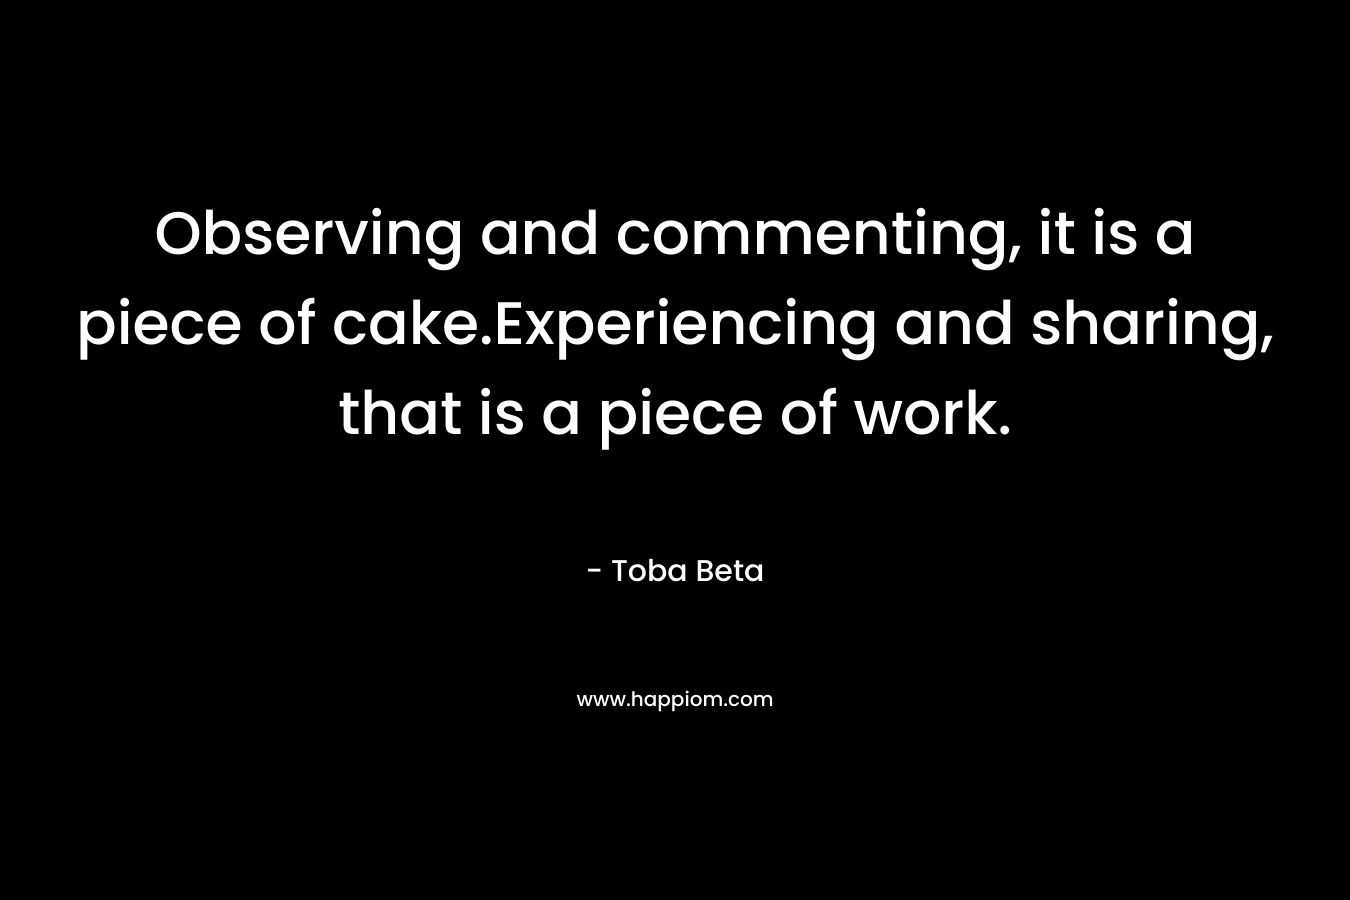 Observing and commenting, it is a piece of cake.Experiencing and sharing, that is a piece of work. – Toba Beta